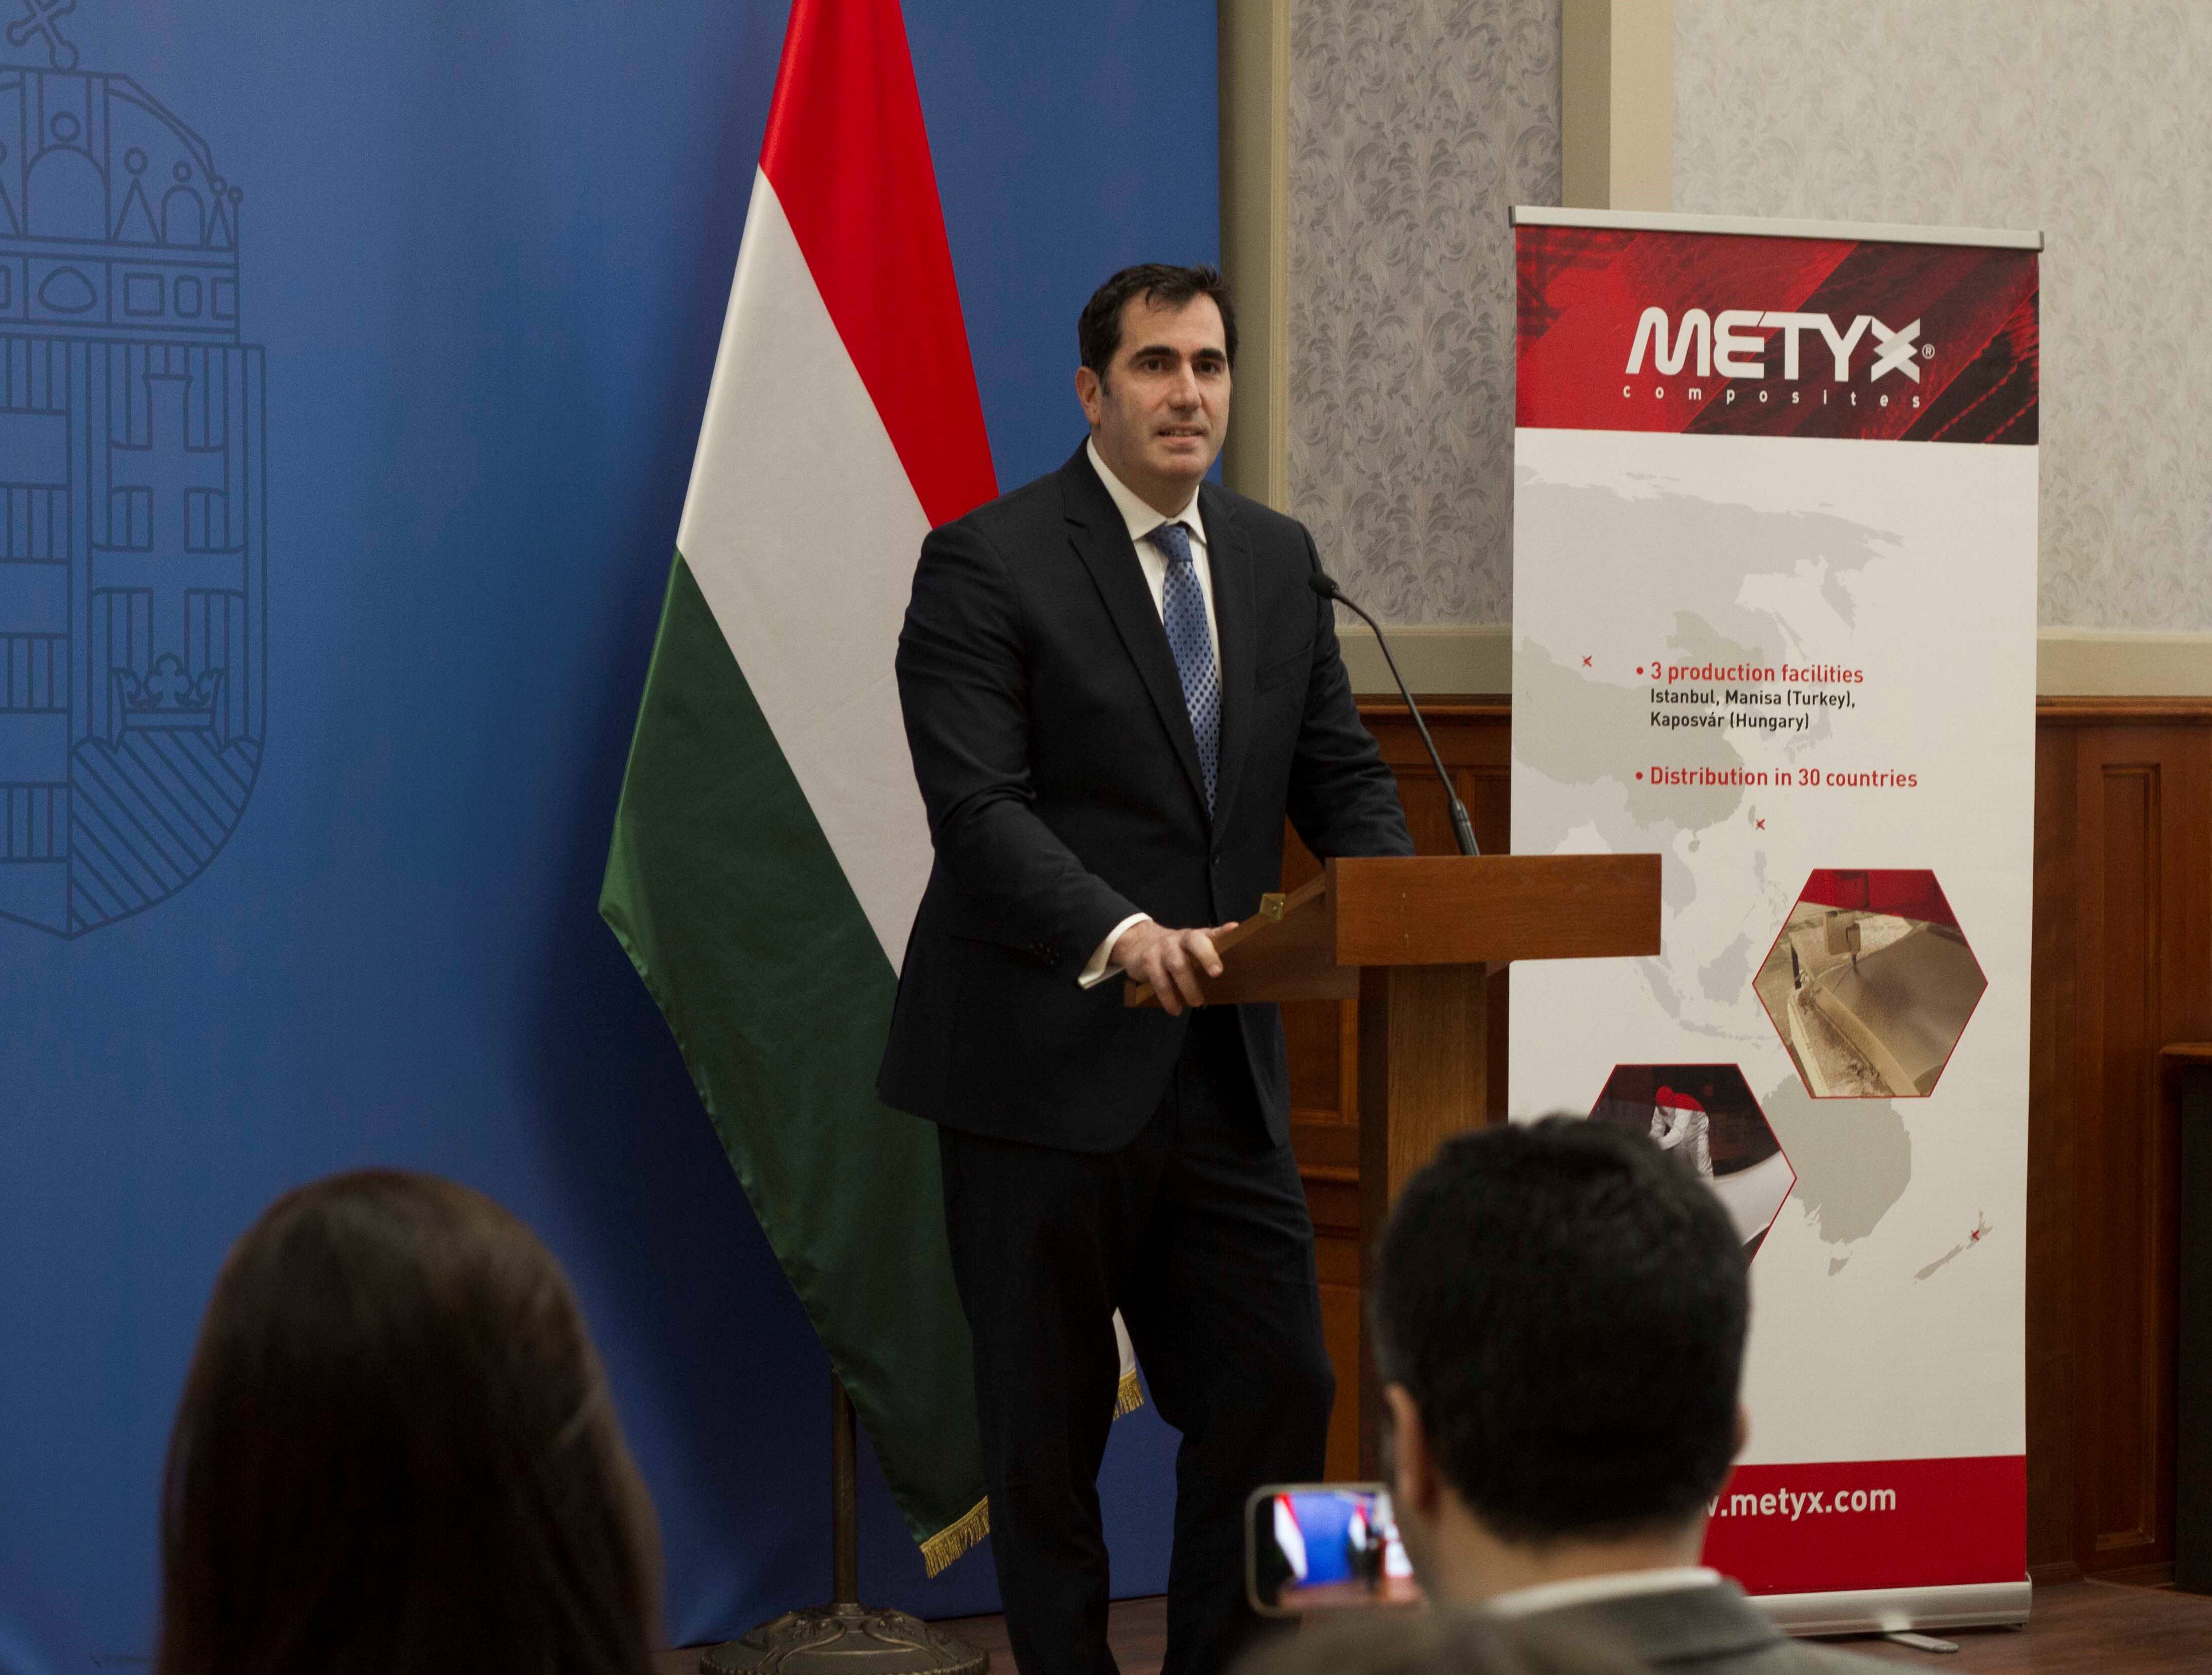 Ugur Üstünel, co-director of Metyx Group, speaking at a press conference in Budapest.